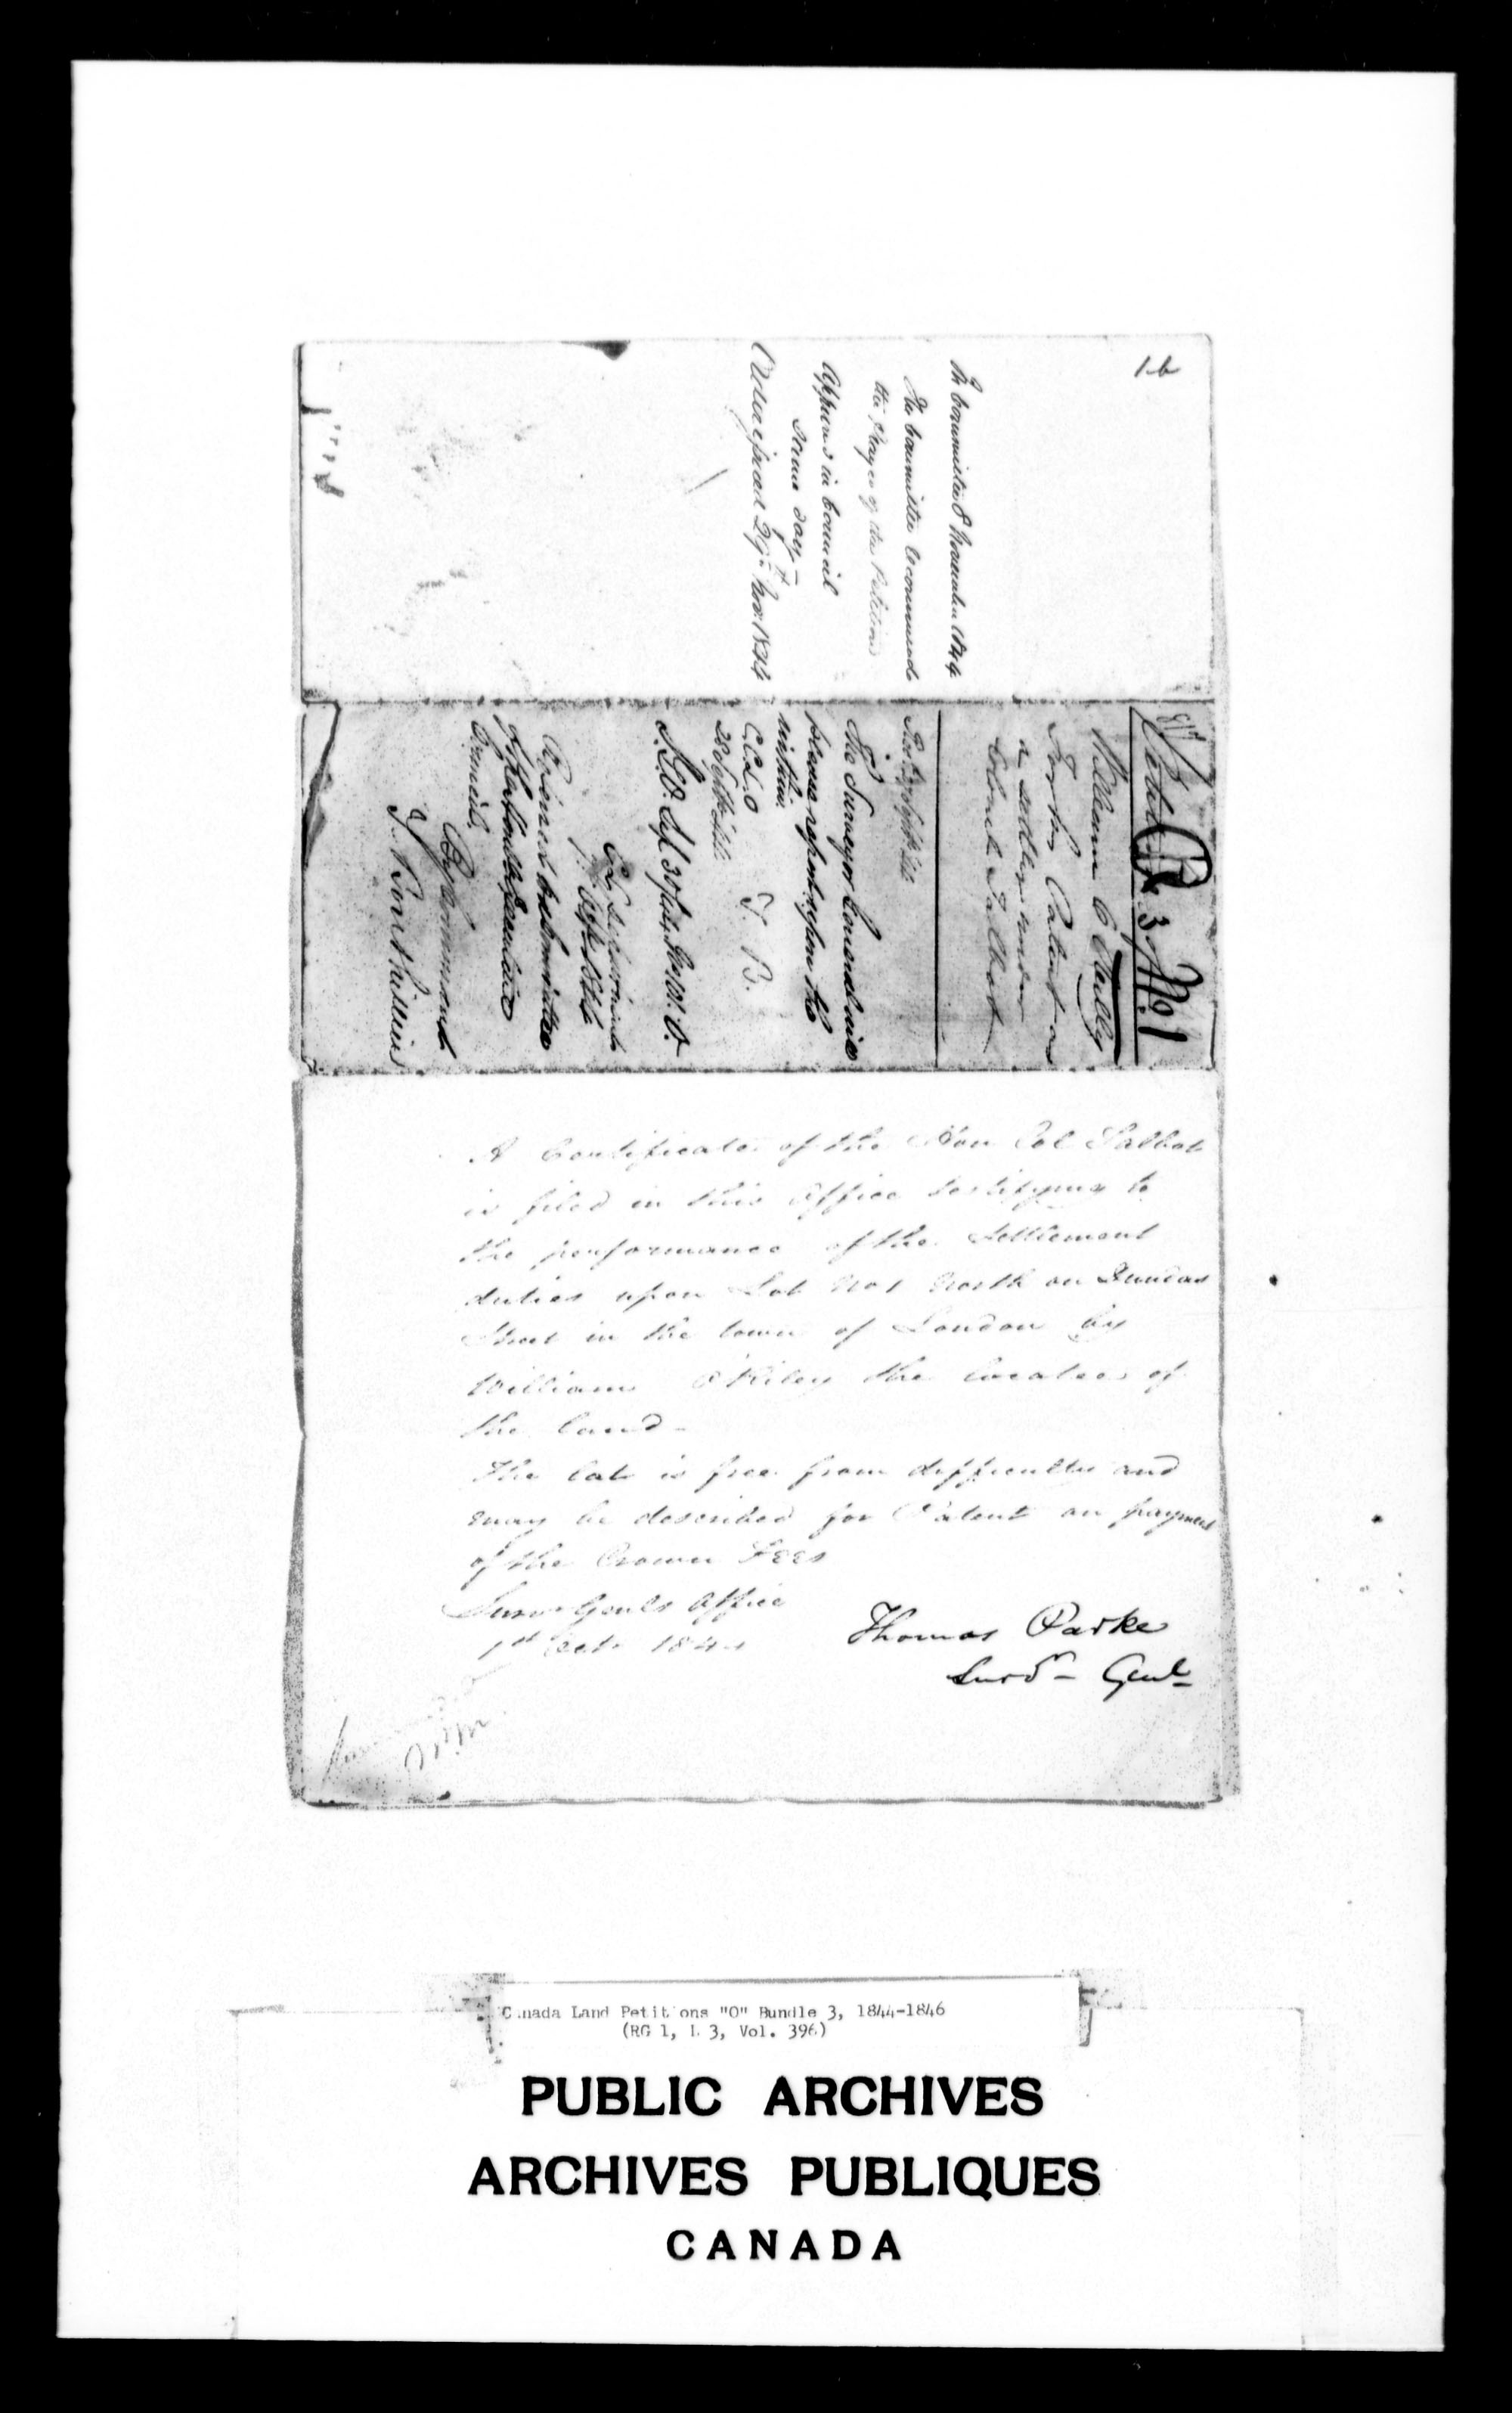 Title: Upper Canada Land Petitions (1763-1865) - Mikan Number: 205131 - Microform: c-2487